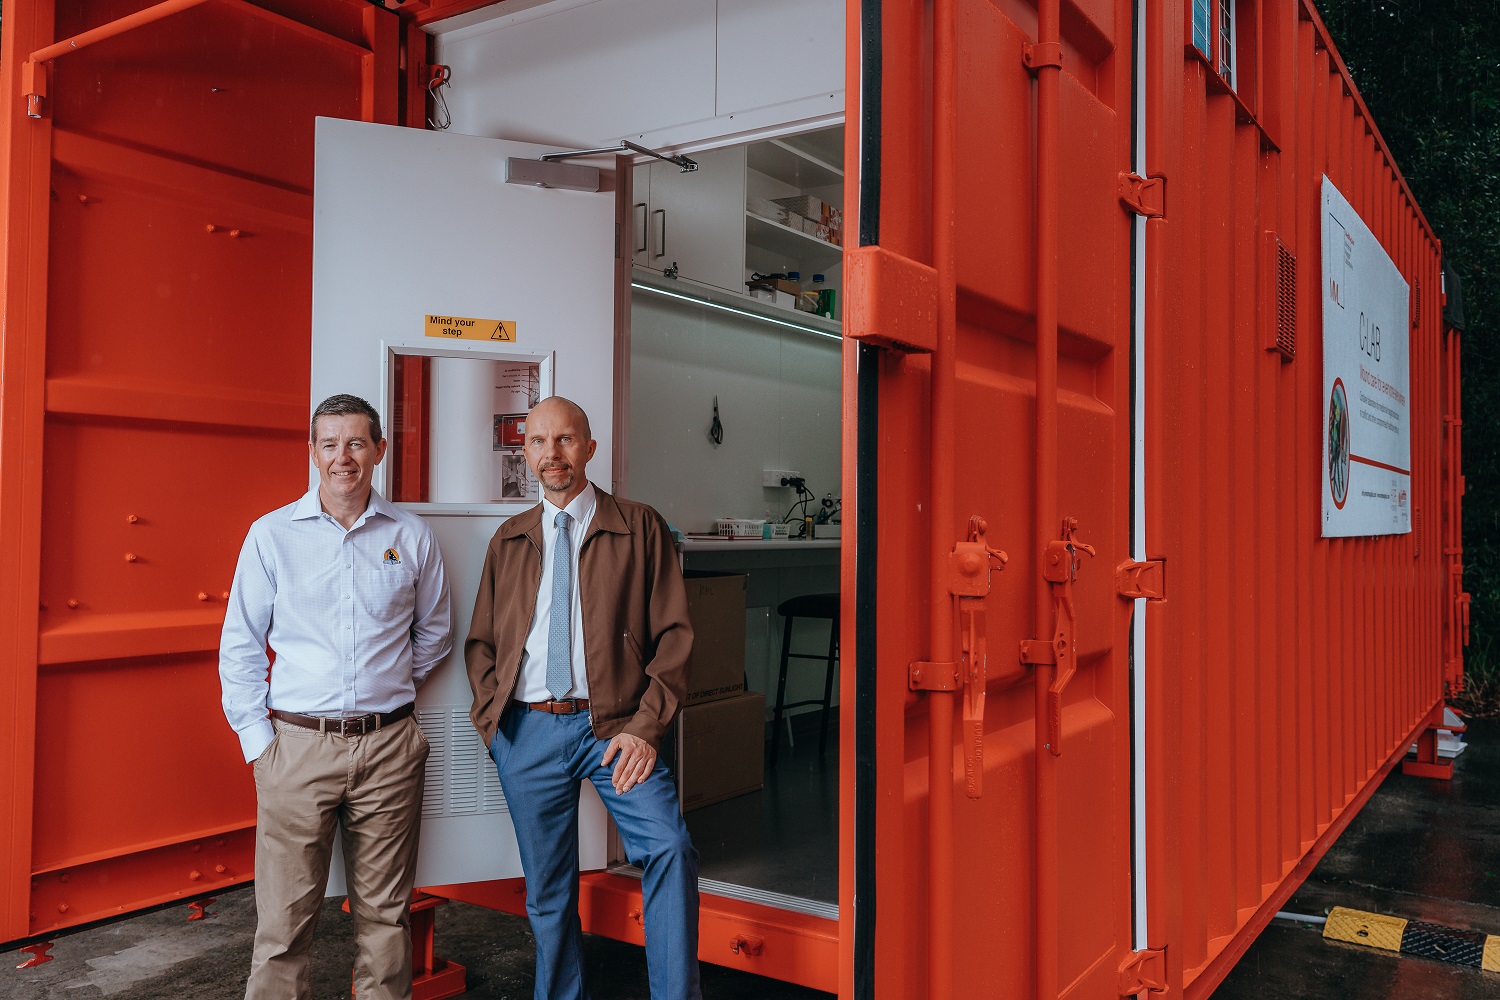 A shipping container with the potential to save lives